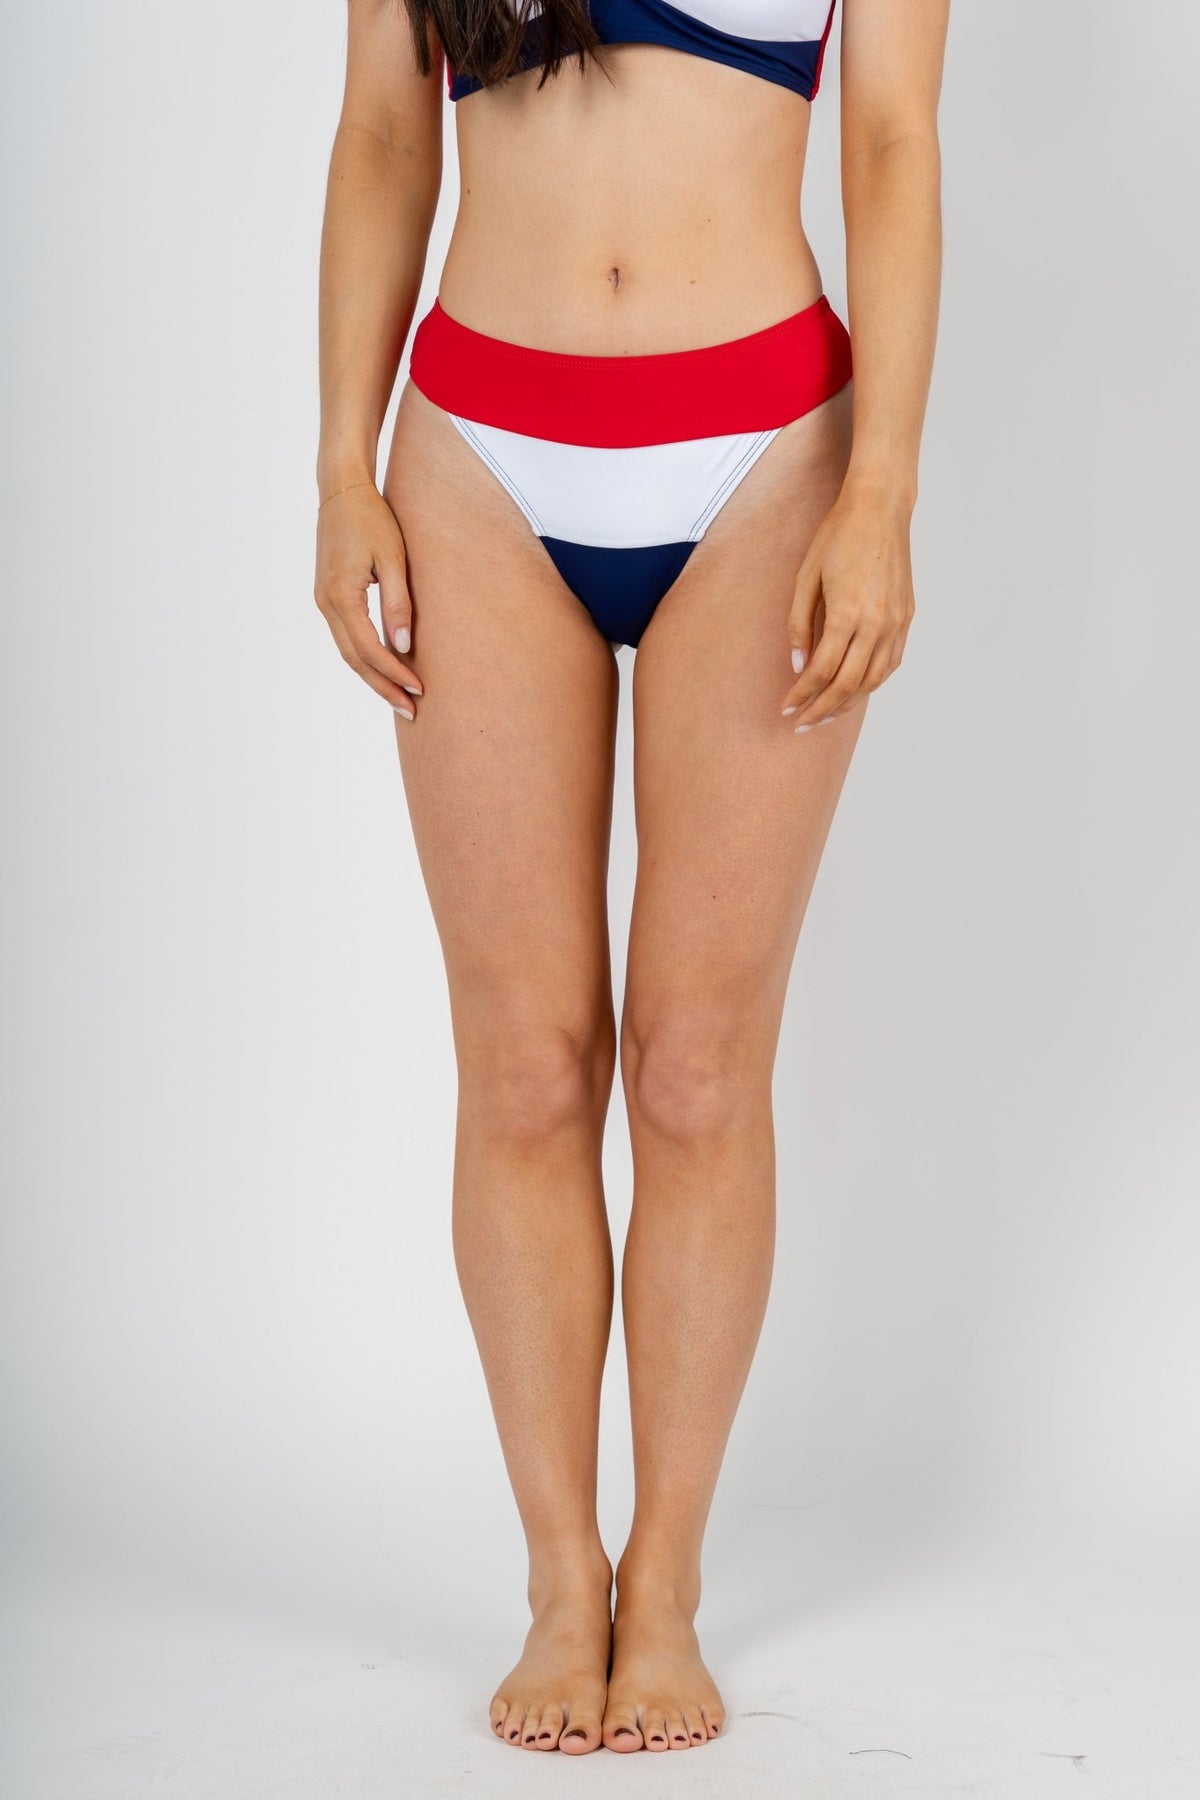 Colorblock bikini bottom red/white/navy - Trendy swimwear - Cute Vacation Collection at Lush Fashion Lounge Boutique in Oklahoma City